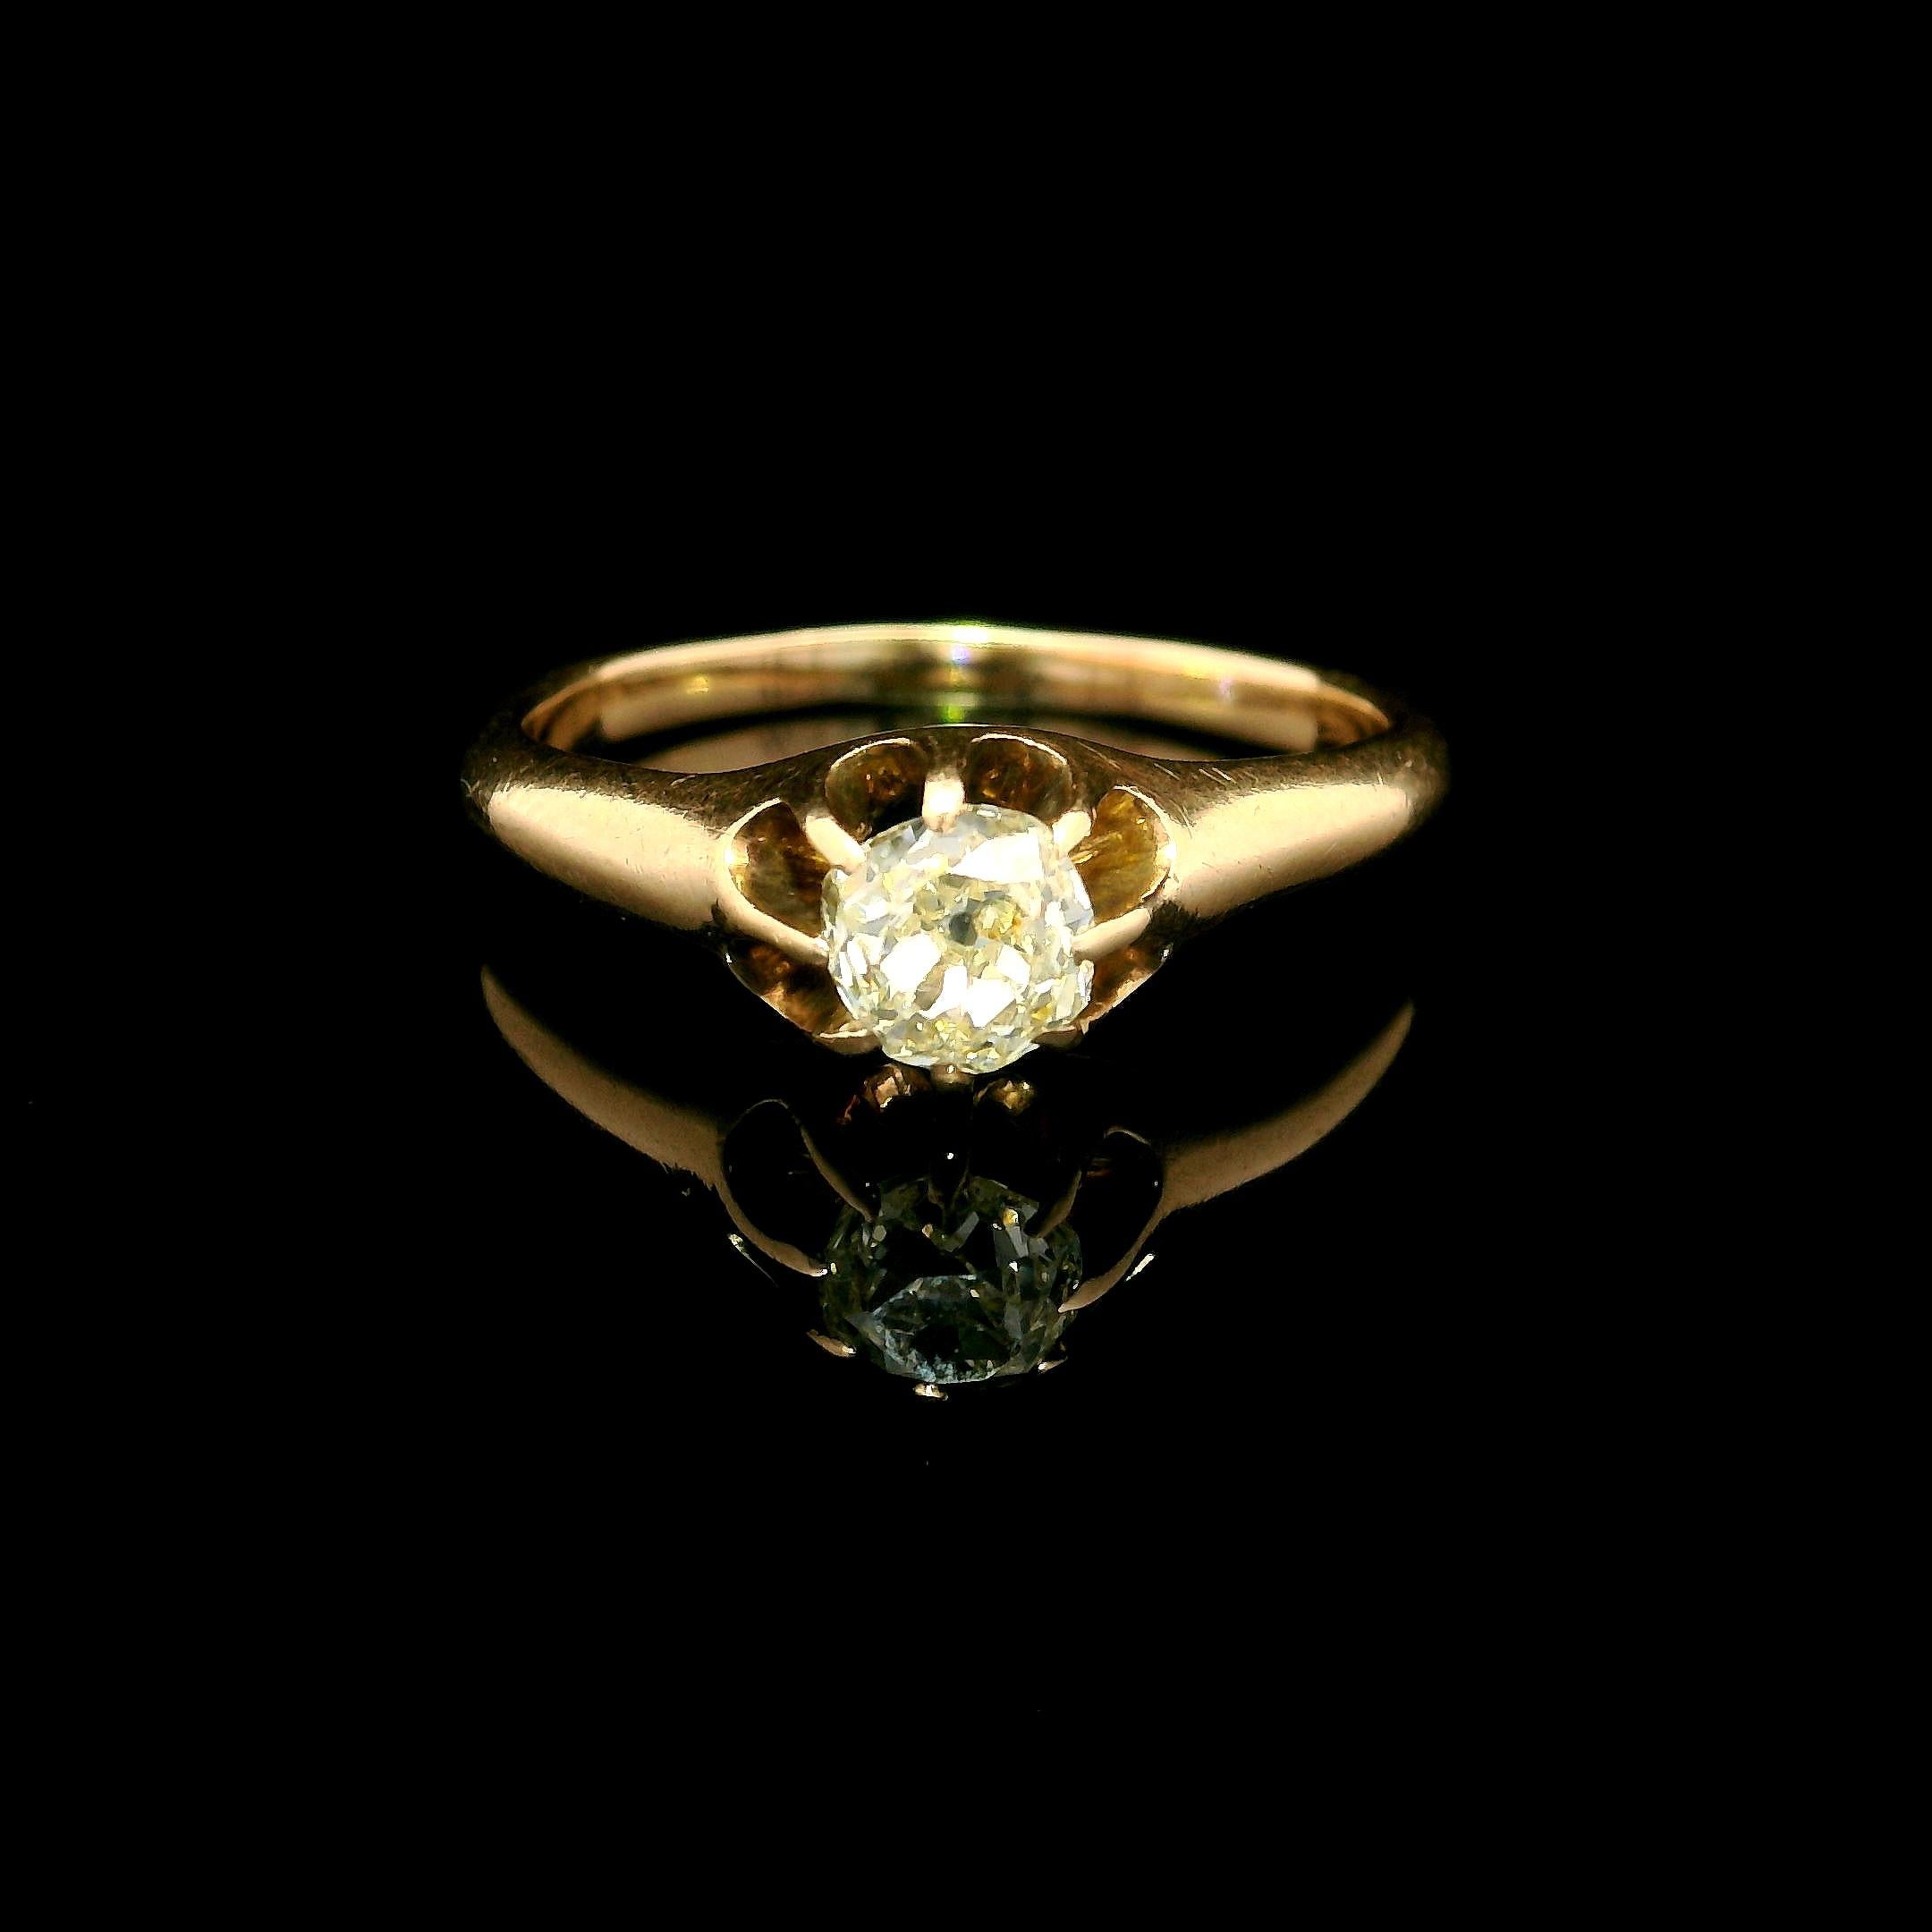 –Stone(s)–
(1) Natural Genuine Diamond - Old Mine Cut - Prong Set - Fiery Warm Yellow Color  - VS1 Clarity - 0.52ctw (approx.)
Material: Solid 10k Yellow Gold
Weight: 2.73 Grams
Ring Size: 7.0 ( fitted on finger, please contact us prior to purchase